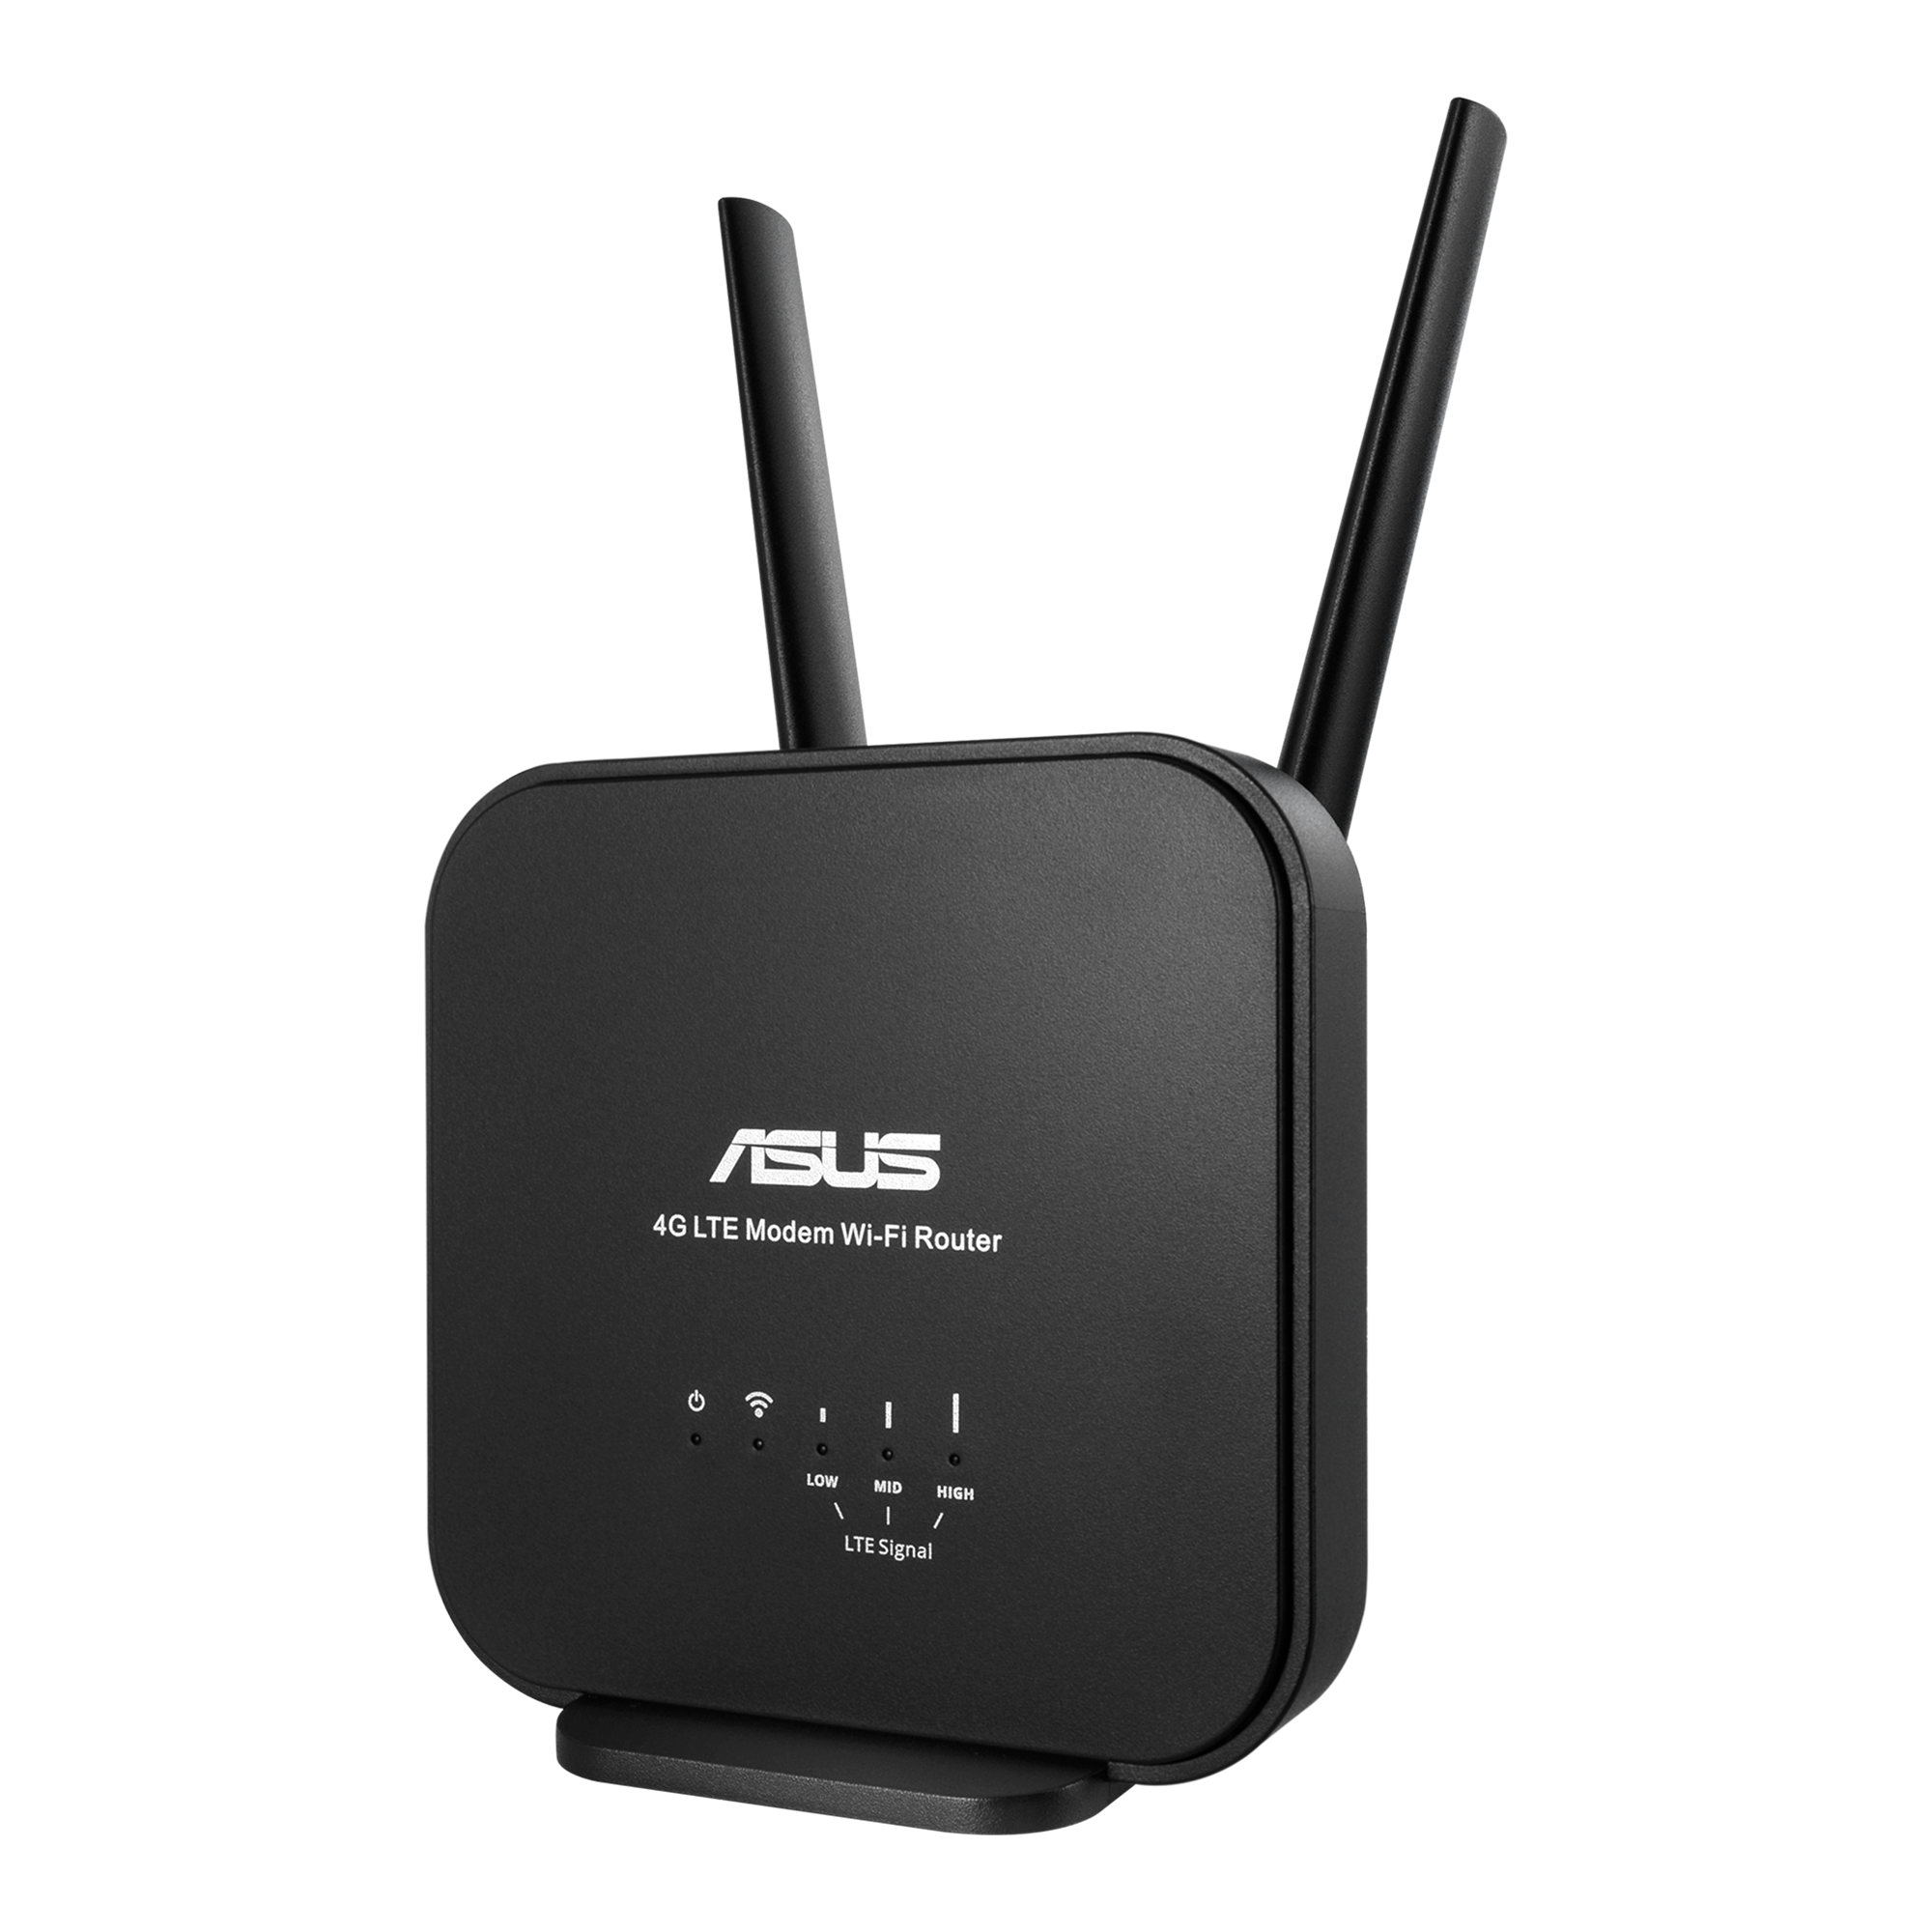 How do I install a SIM card for my 4G Wi-Fi router or Mobile Wi-Fi?